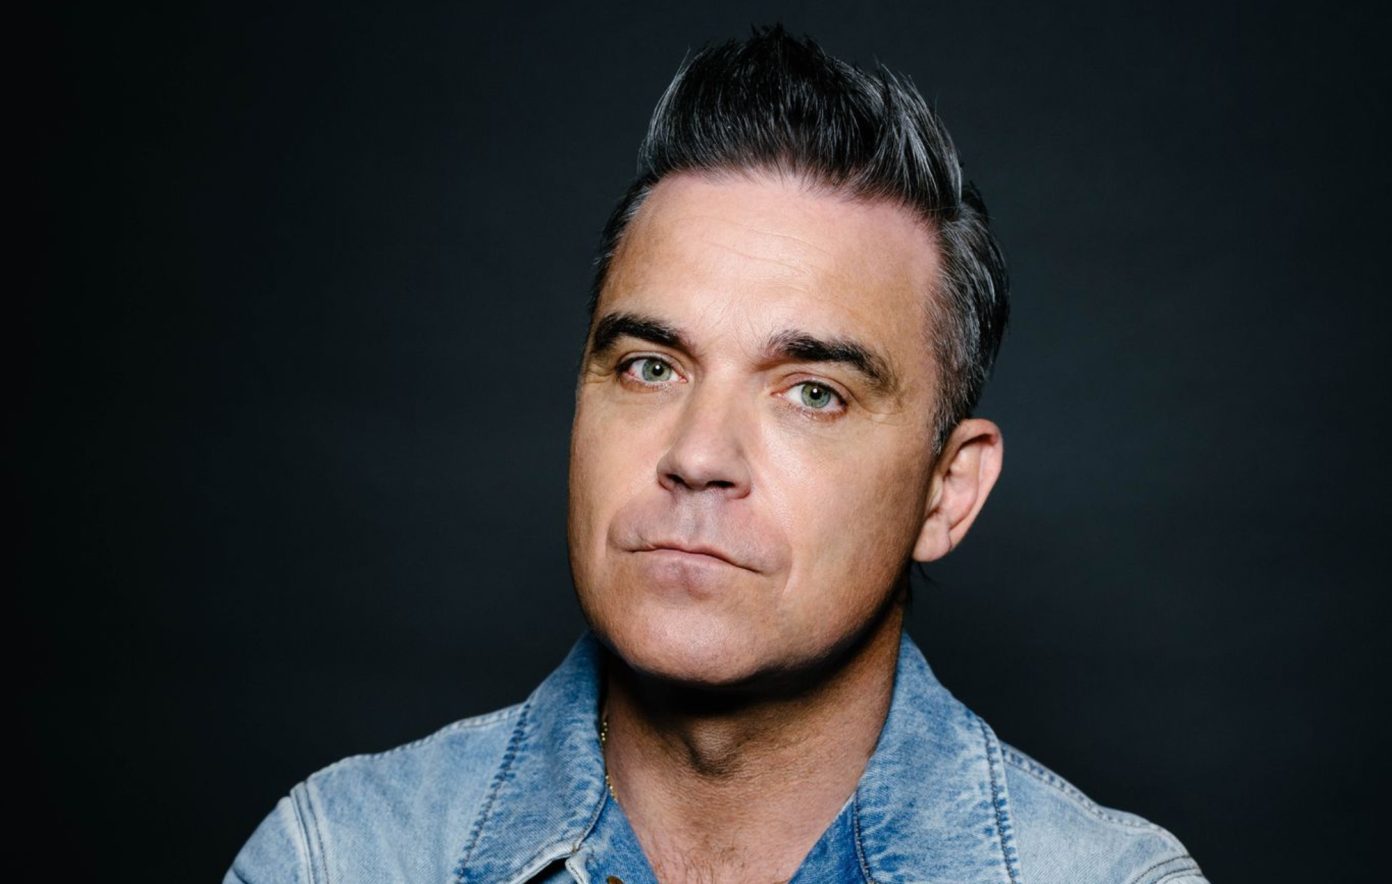 Two Robbie Williams Concerts Have Been Scheduled For Croatia, Yours Truly, News, March 28, 2023